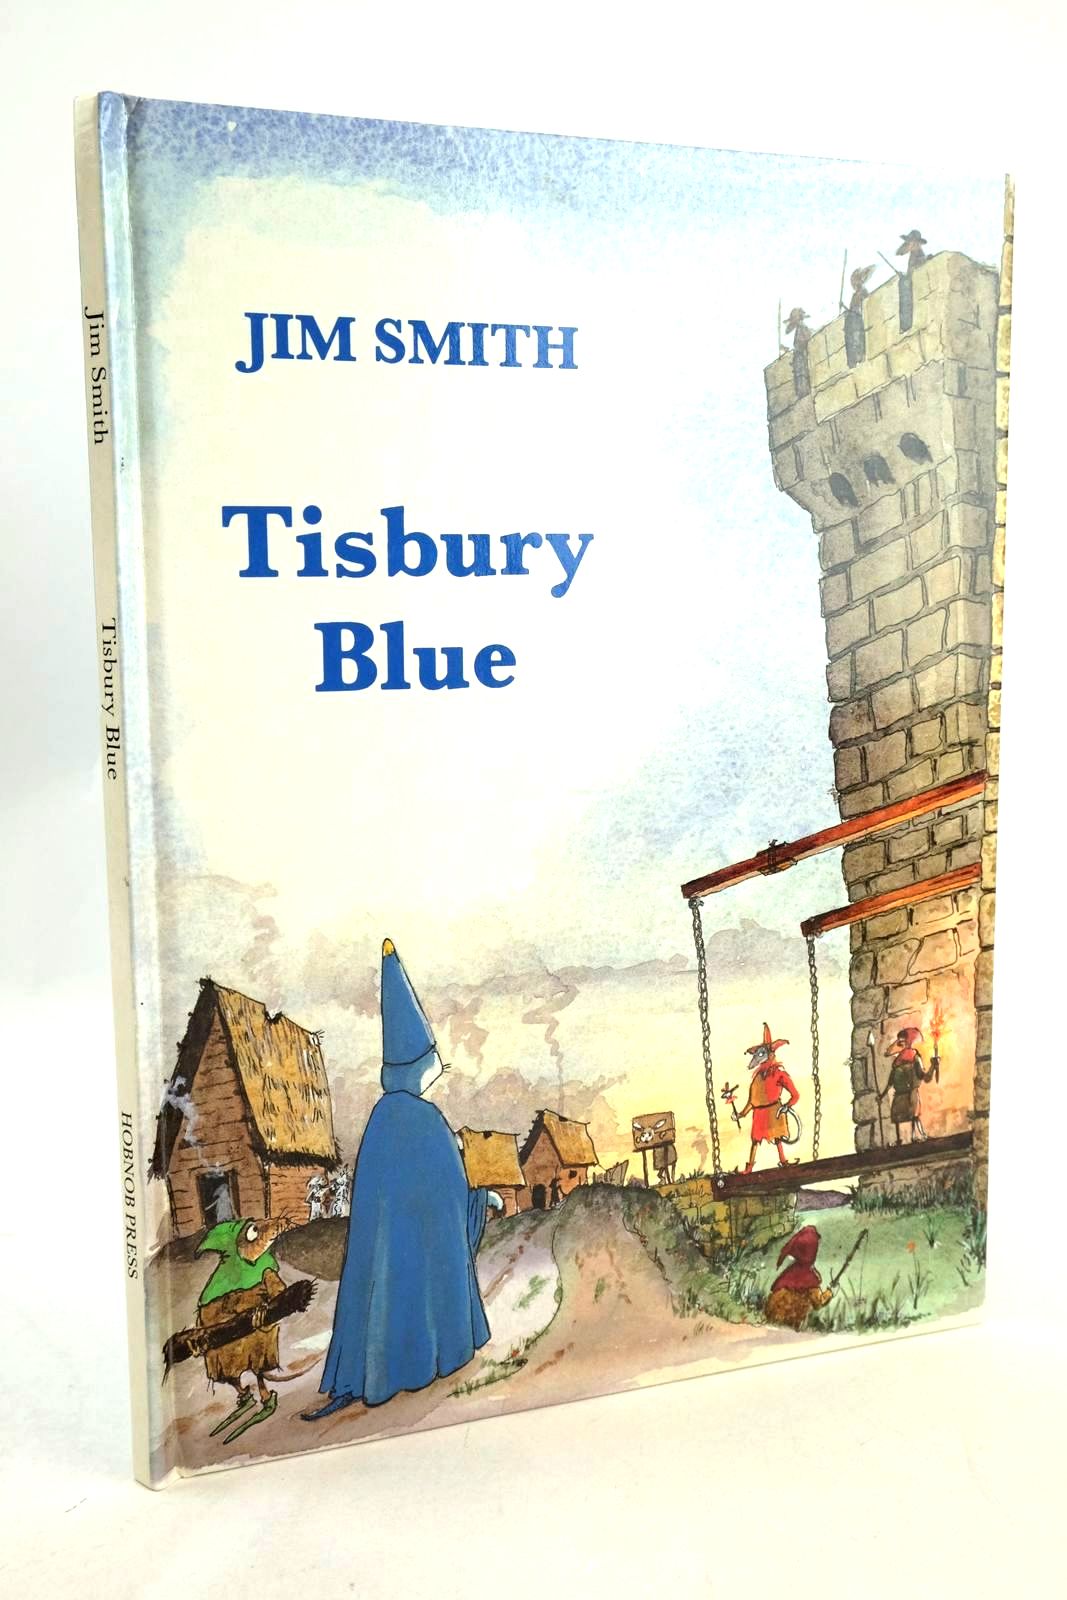 Photo of TISBURY BLUE written by Smith, Jim illustrated by Smith, Jim published by The Hobnob Press (STOCK CODE: 1327310)  for sale by Stella & Rose's Books